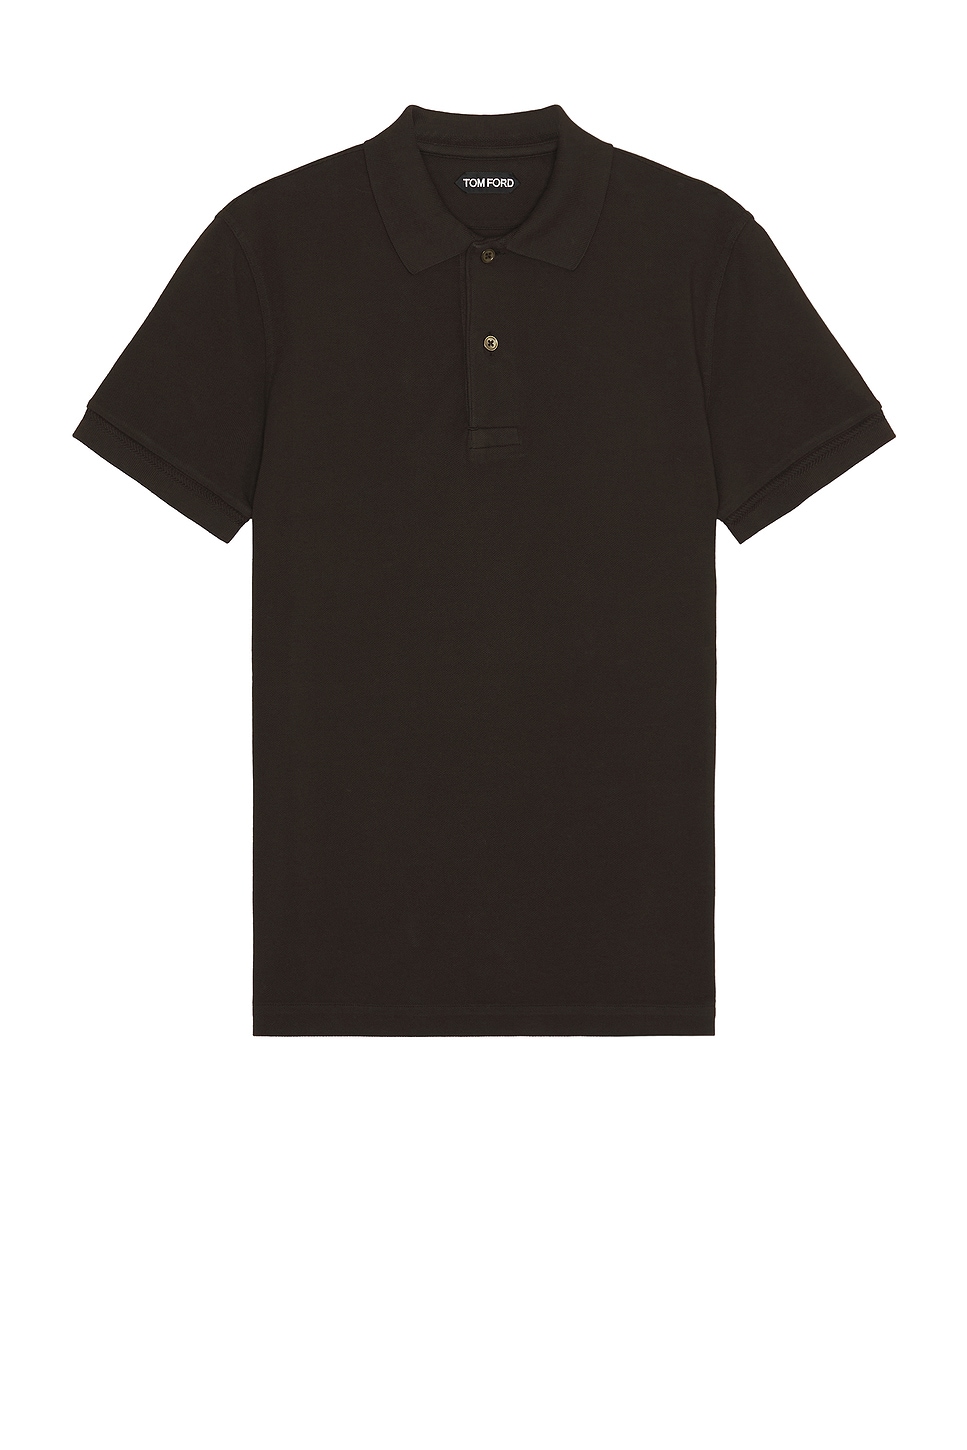 Image 1 of TOM FORD Tennis Piquet Short Sleeve Polo in Dark Brown